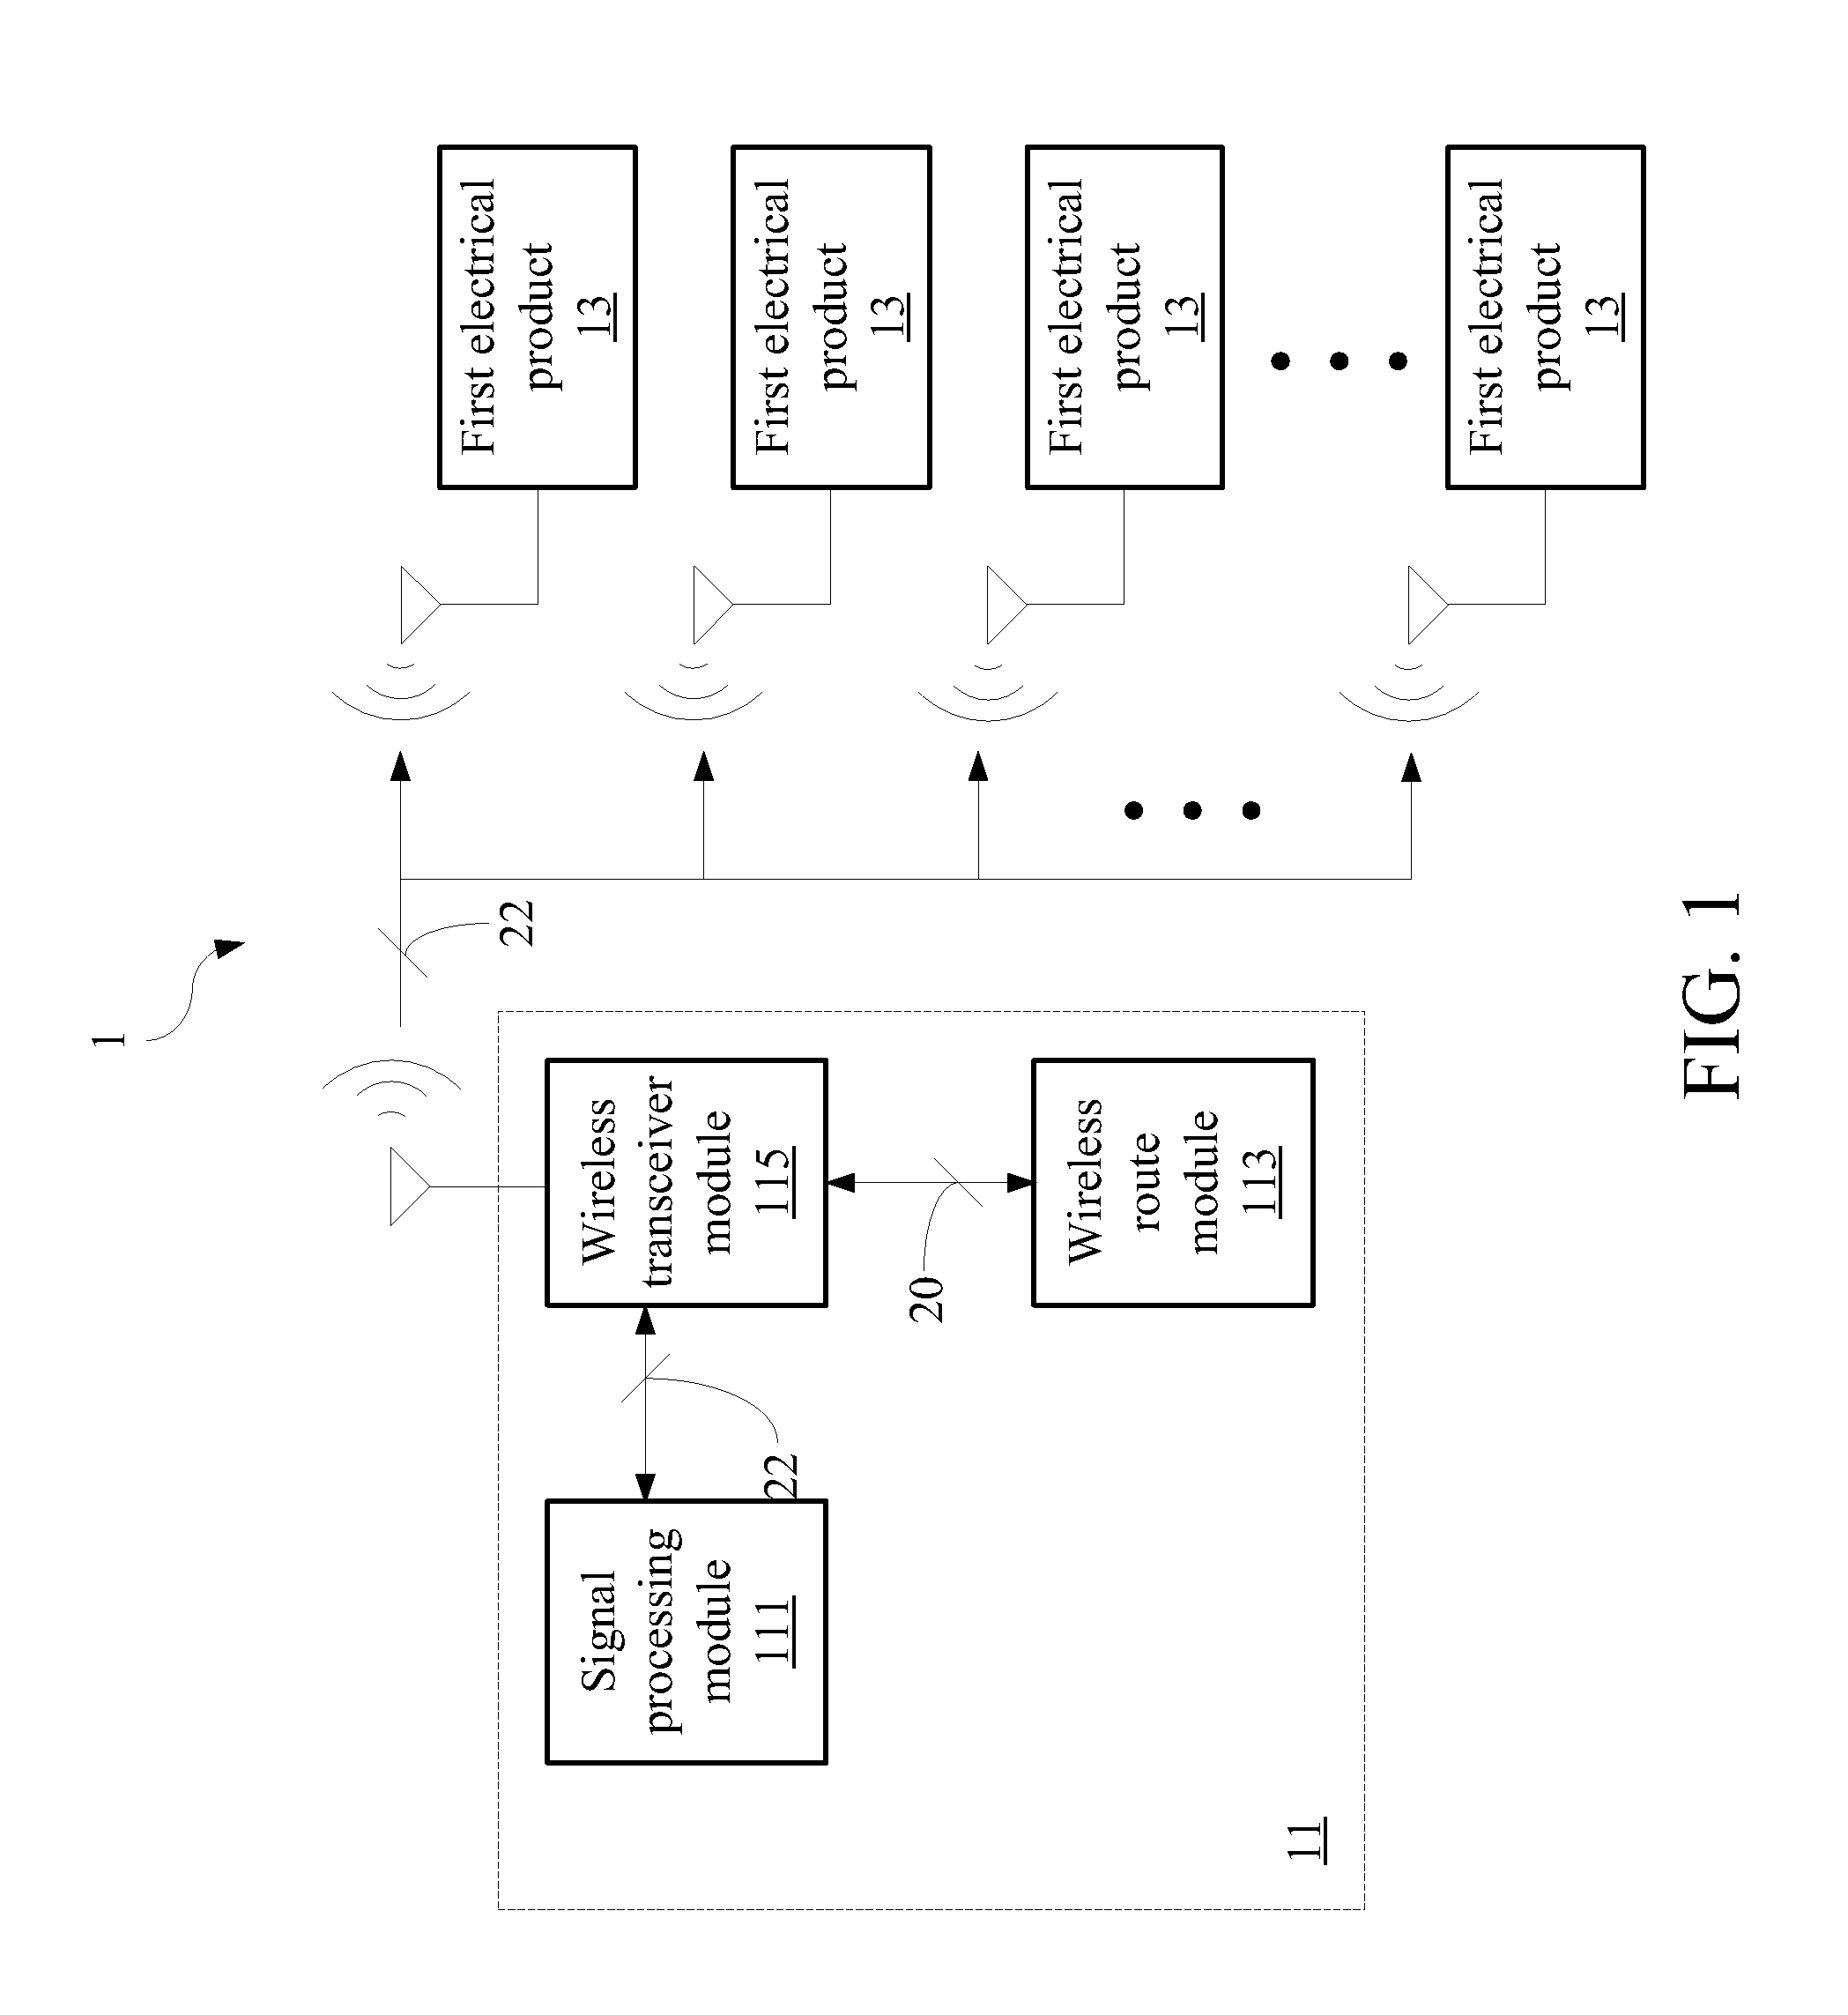 Electrical device having a wireless route function